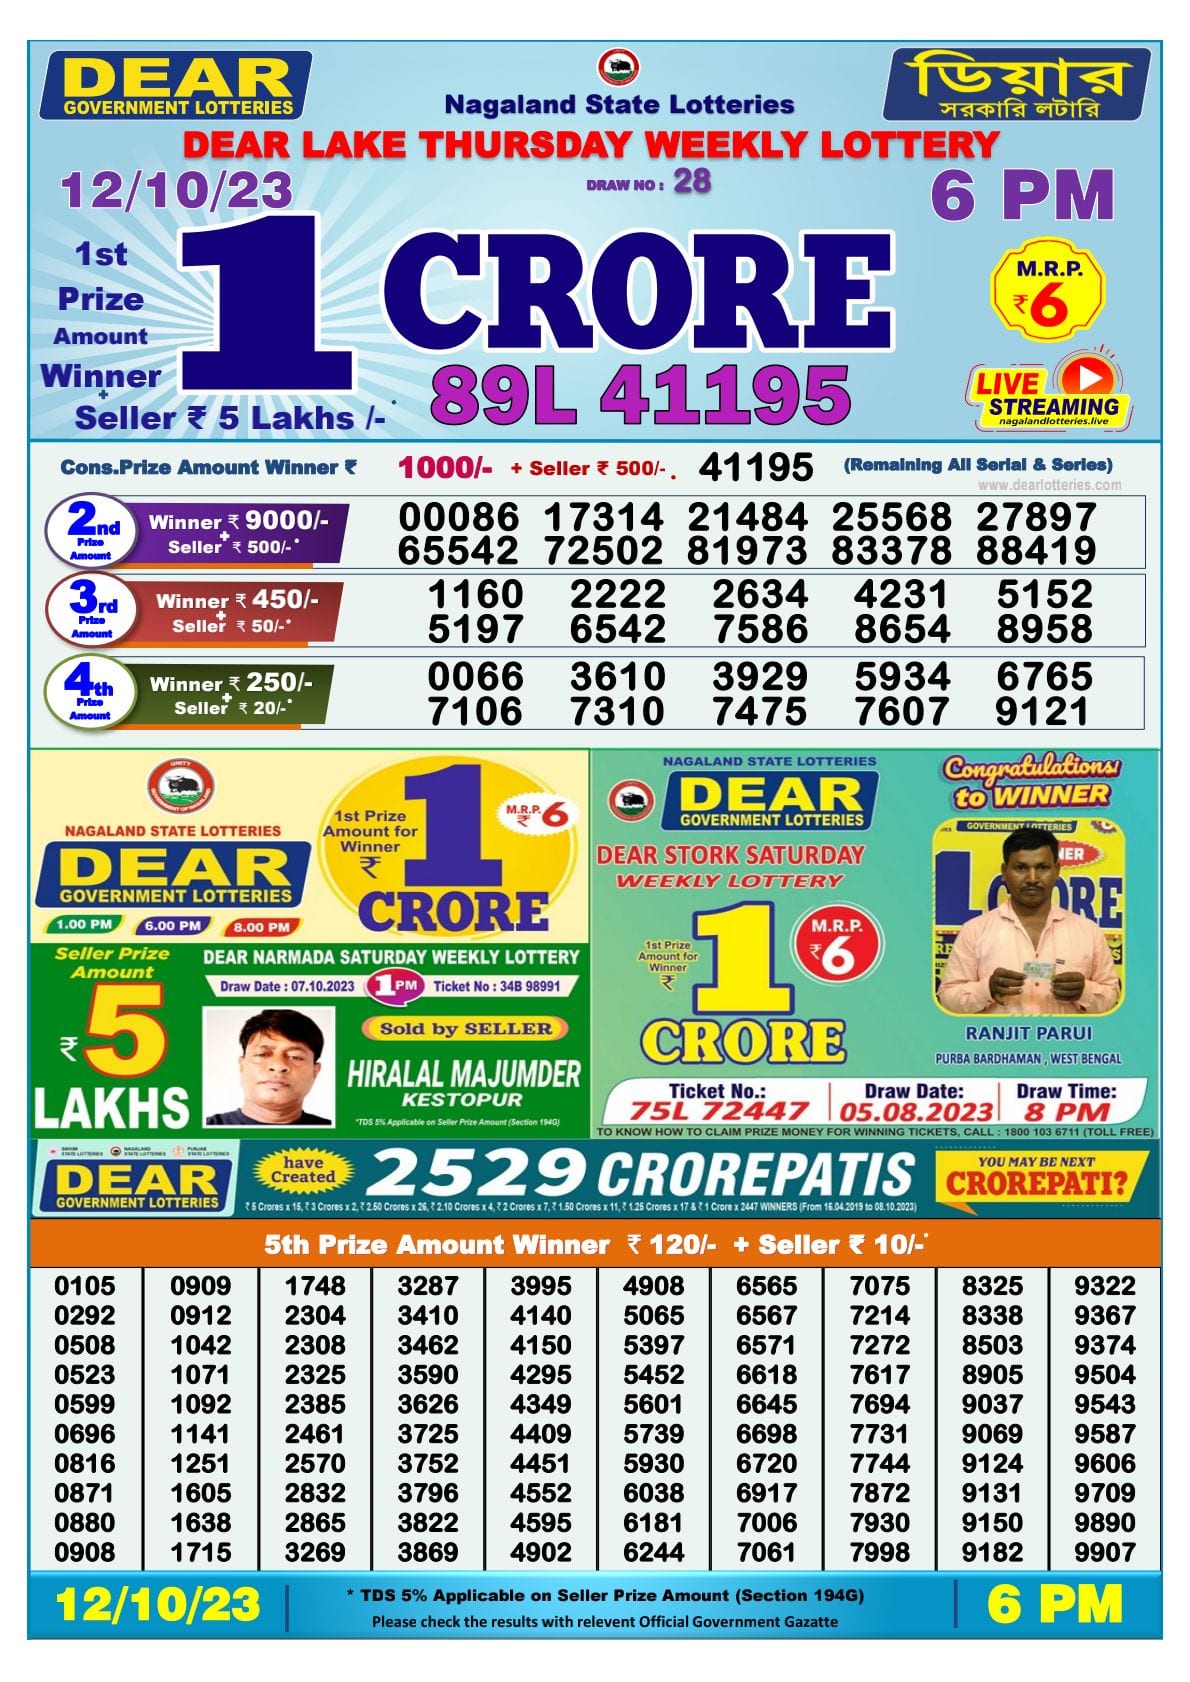 Lottery Sambad Live - All Lottery Info - DAY15122019 | Facebook